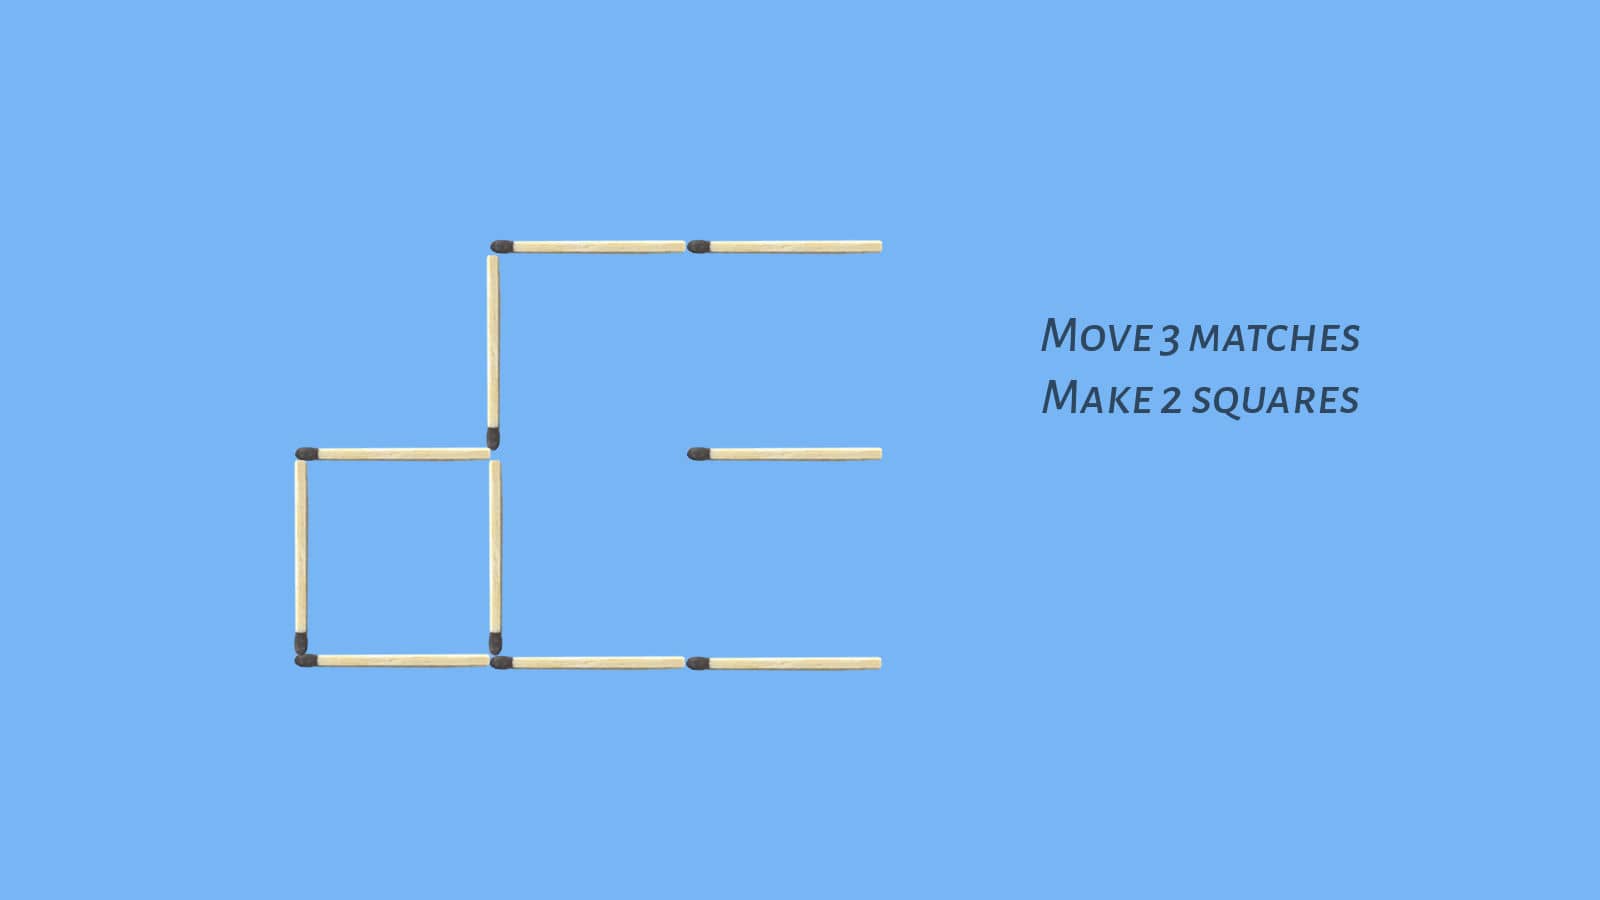 Move 3 matches to make 2 squares matchstick puzzle 1